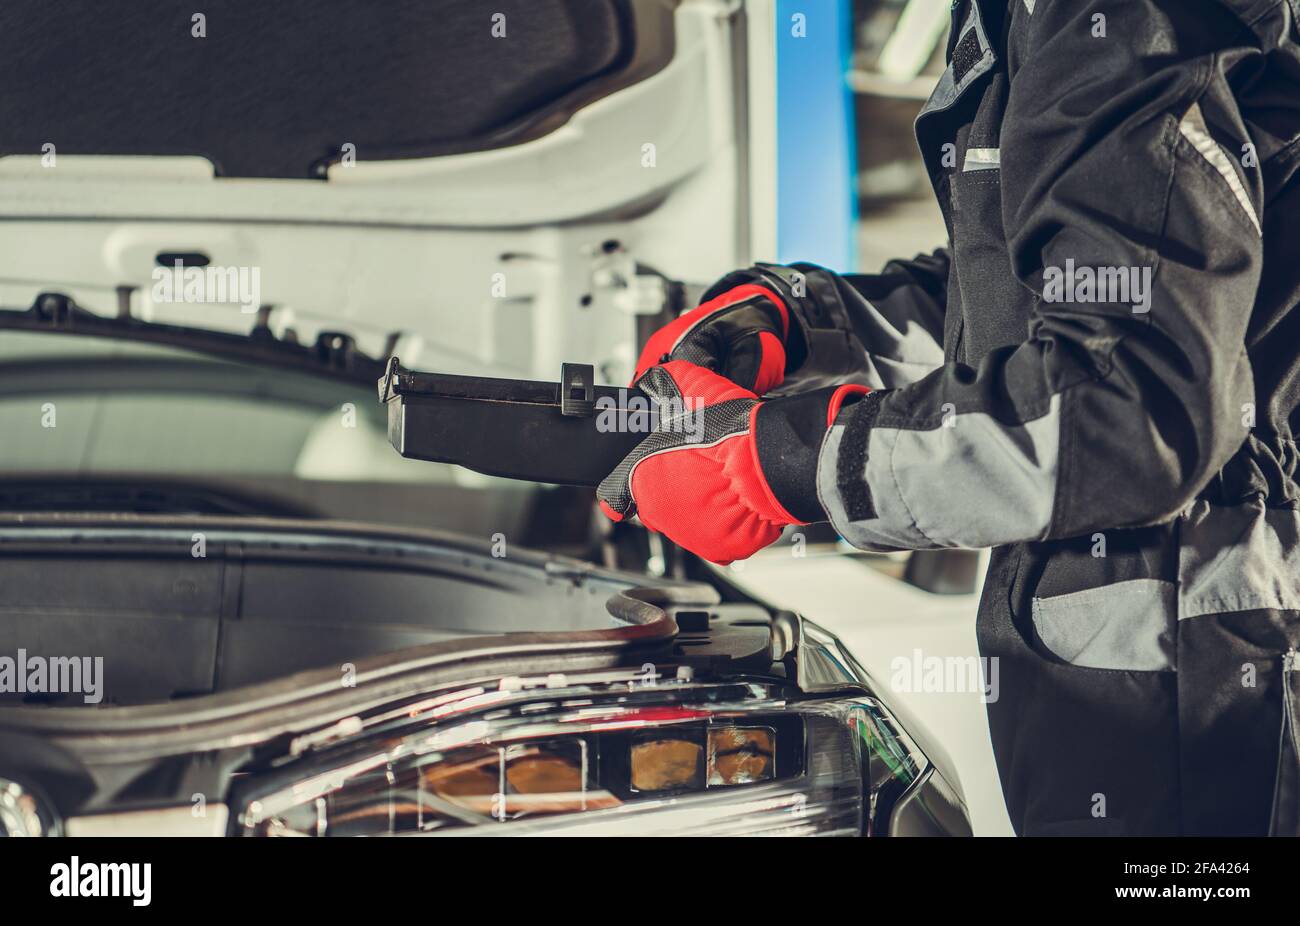 Professional Car Mechanic Looking For Burned Fuse Under Vehicle Hood. Automotive Industry Theme. Stock Photo